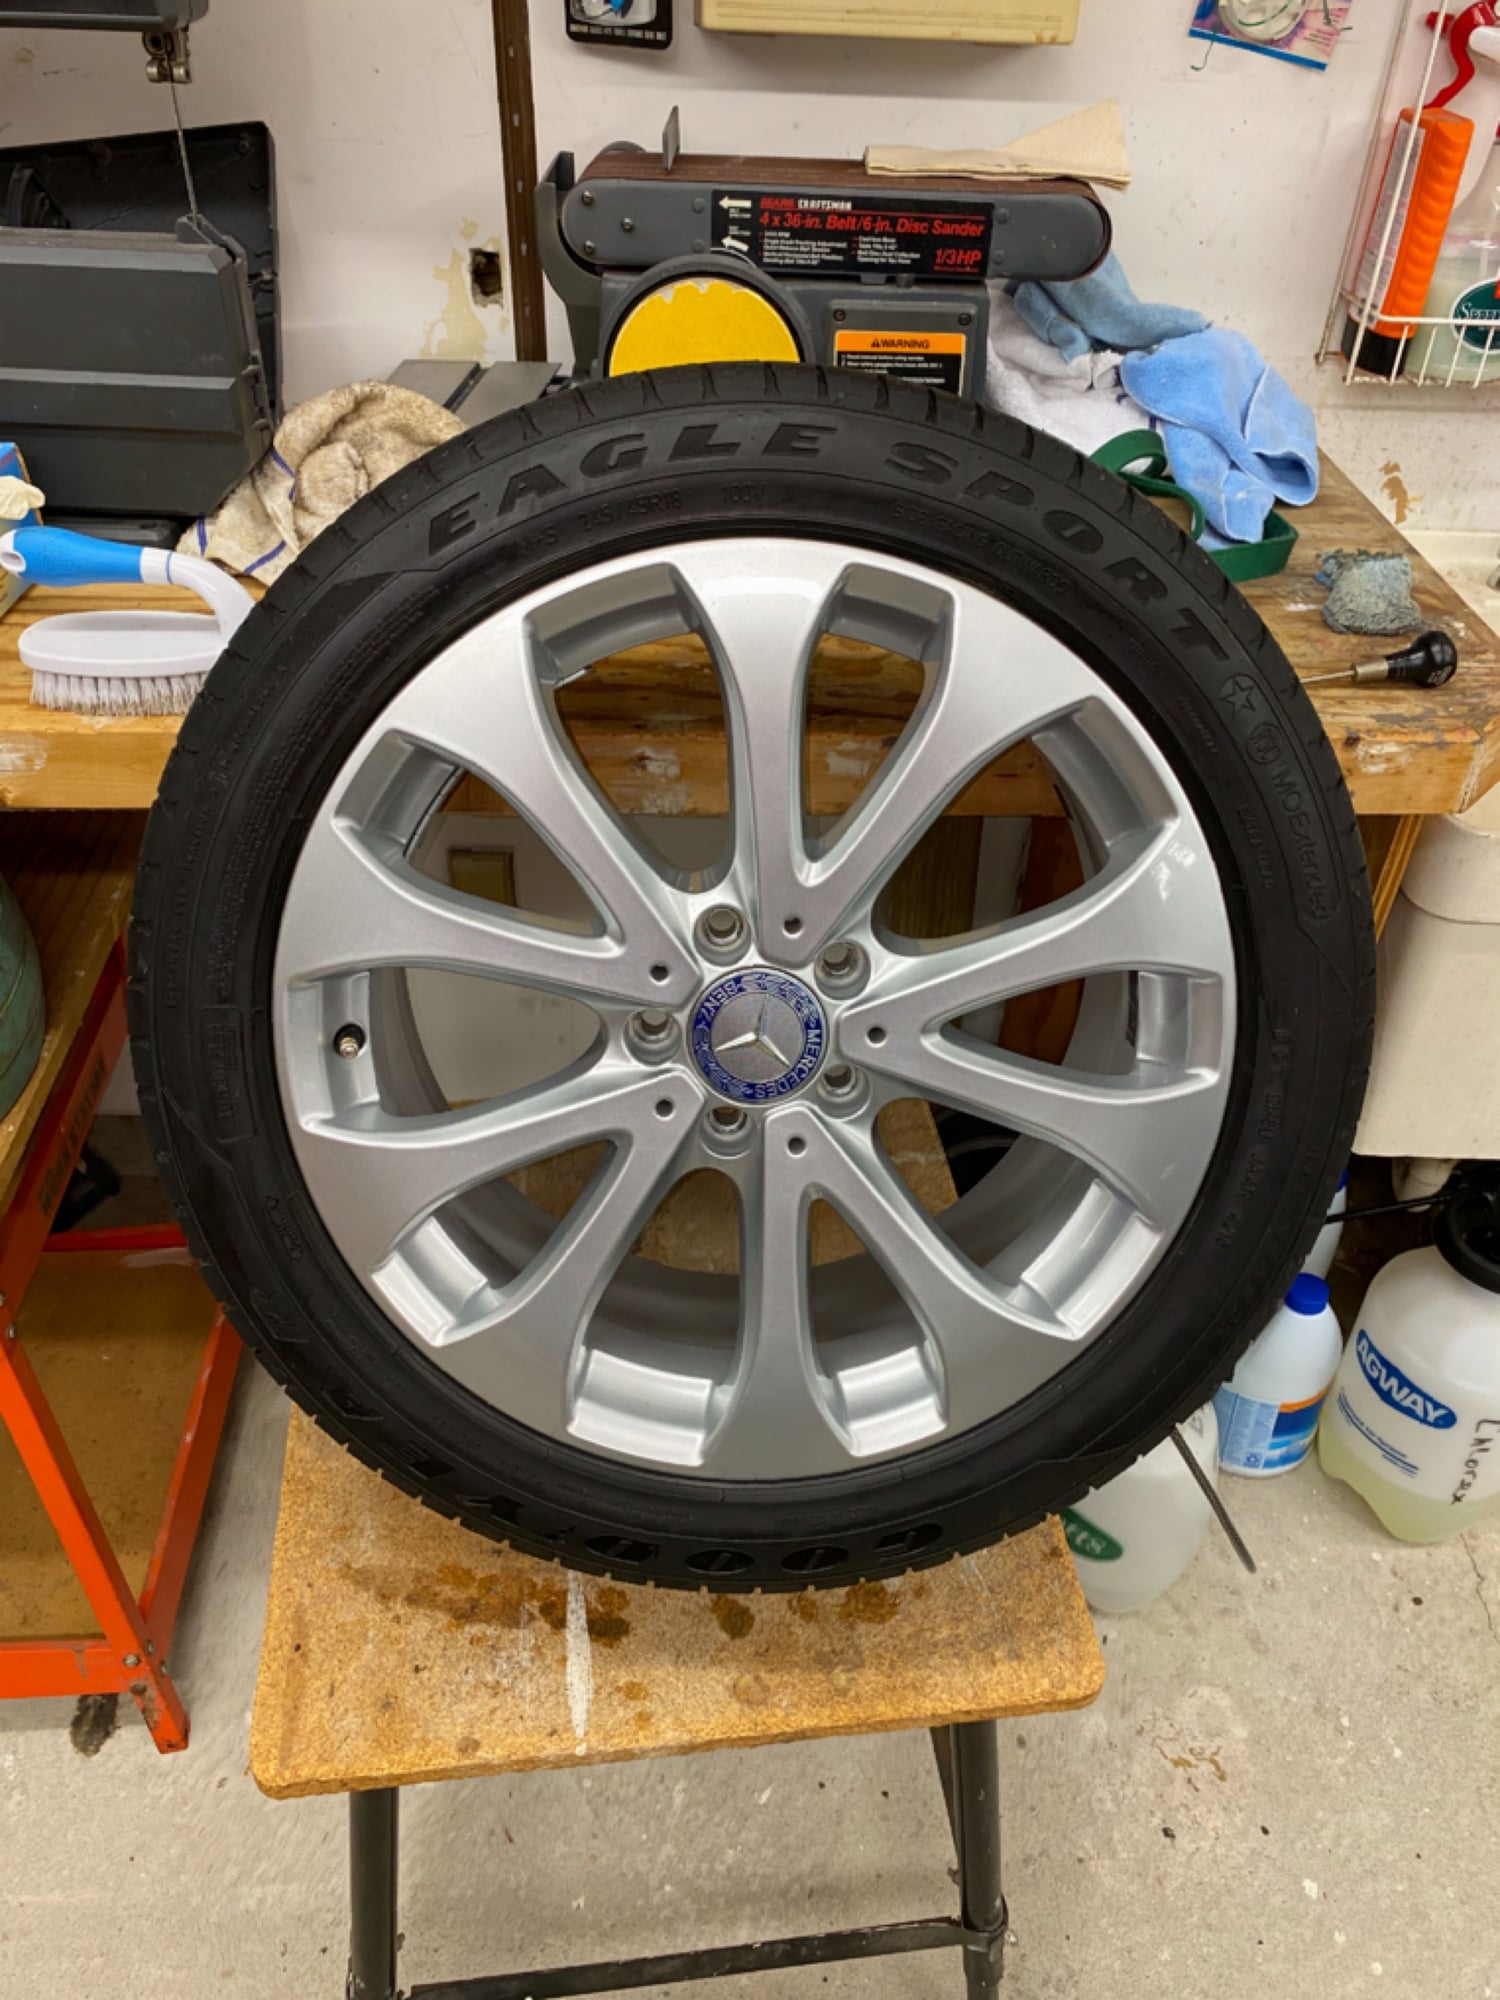 Wheels and Tires/Axles - 2017 E 300 SEDAN FULL  SIZE SPARE TIRE...SAVED THE DAY - Used - 2017 to 2020 Mercedes-Benz E300 - Port Jefferson, NY 11777, United States